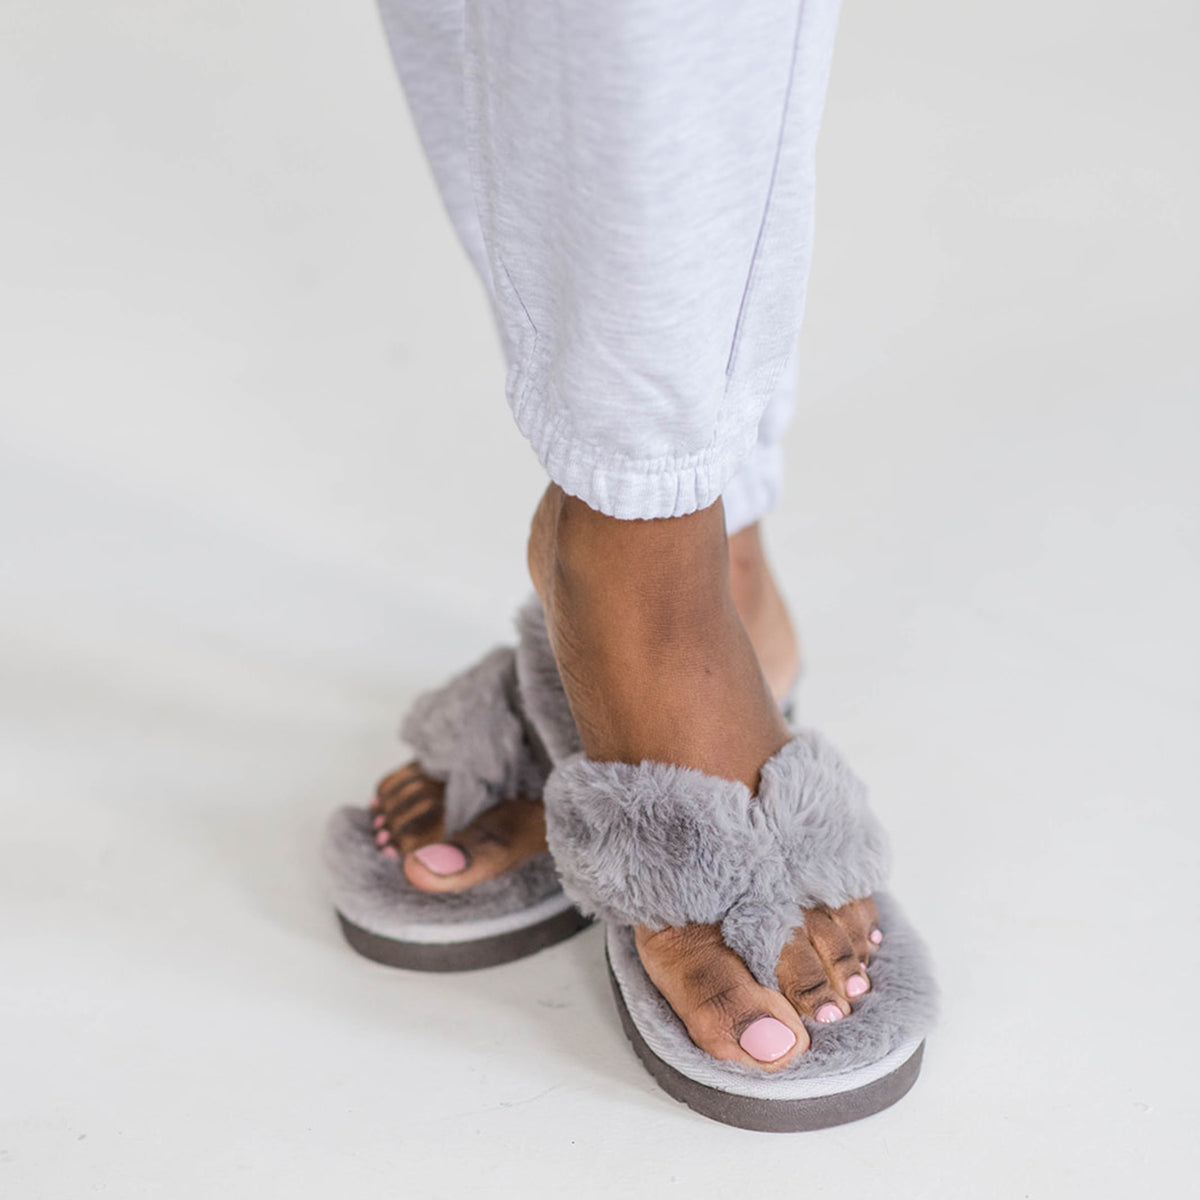 Glacier Grey | Recycled Carrie Flip Flop Slippers